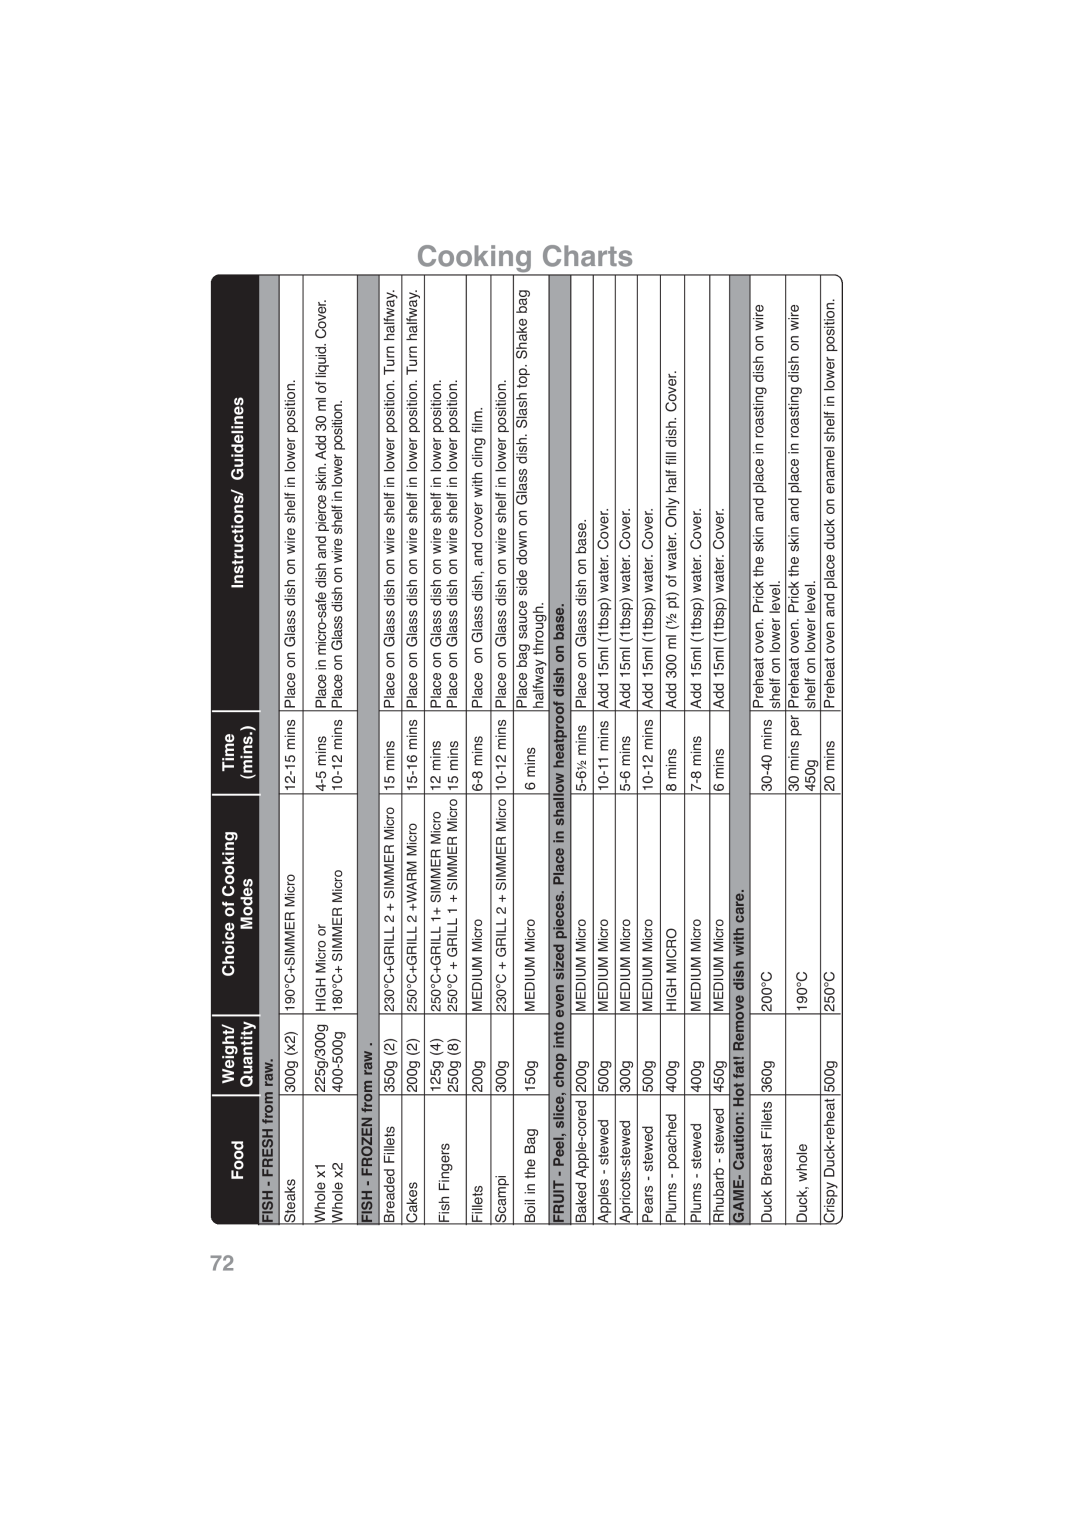 Panasonic NN-CF768M Cooking Charts, Weight, Choice of Cooking, Time, Food, Quantity, Modes, mins, Instructions/ Guidelines 